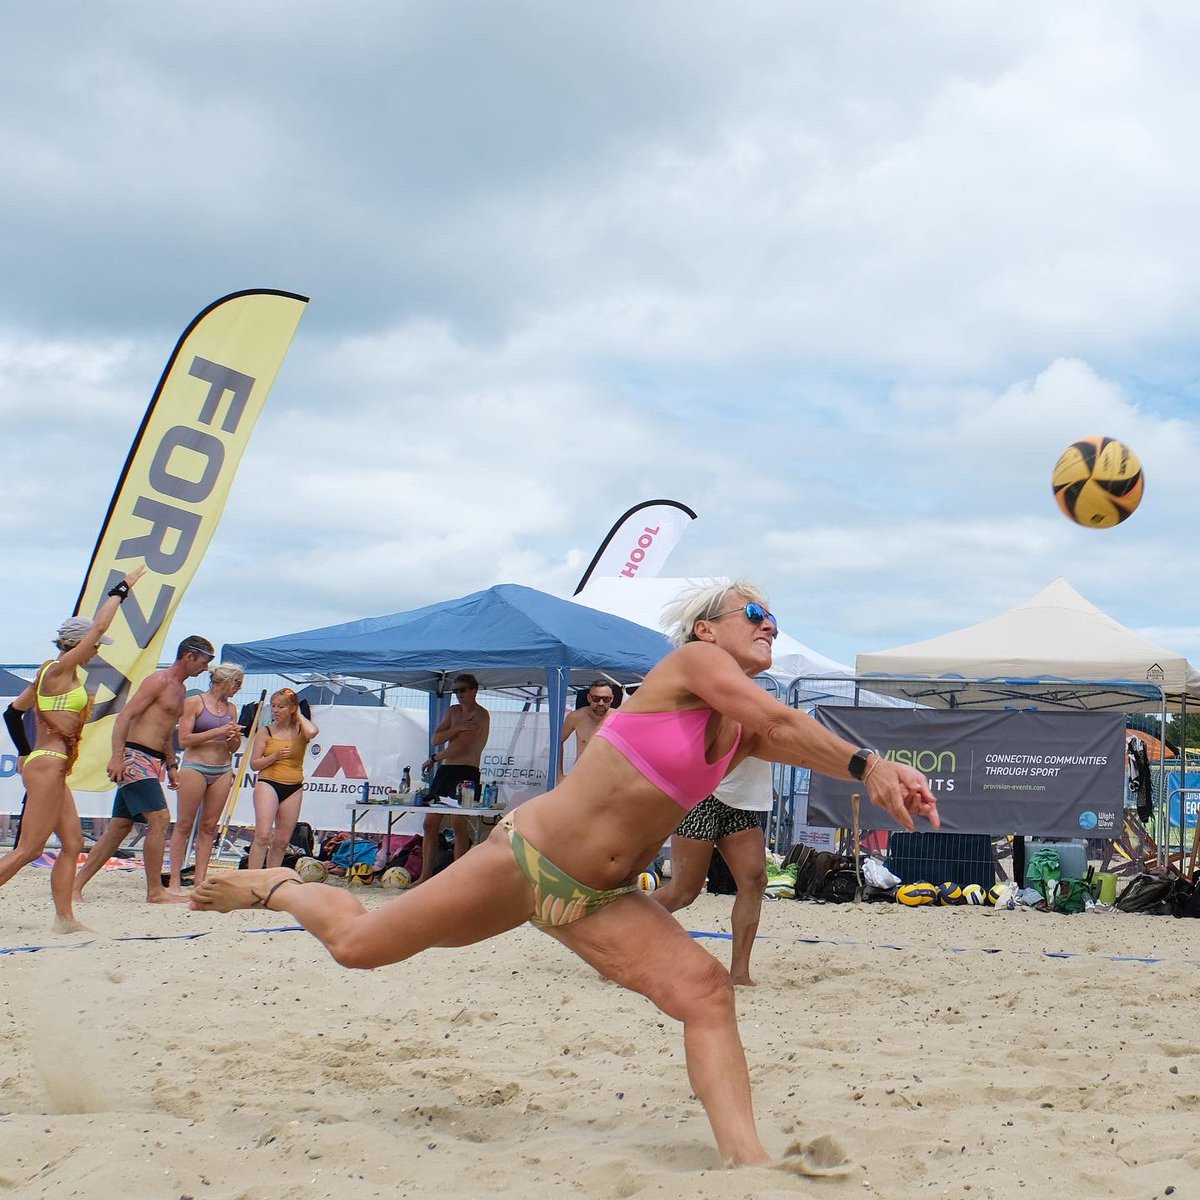 Looking forward to seeing the Angry Seagull Beach Volleyball 🏐🙌 Crew back on the sand again in 2023 at Wight Wave Beach Fest #volleyball #beachvibes #beachvolleyball #beachlife #beachfest #wightwave